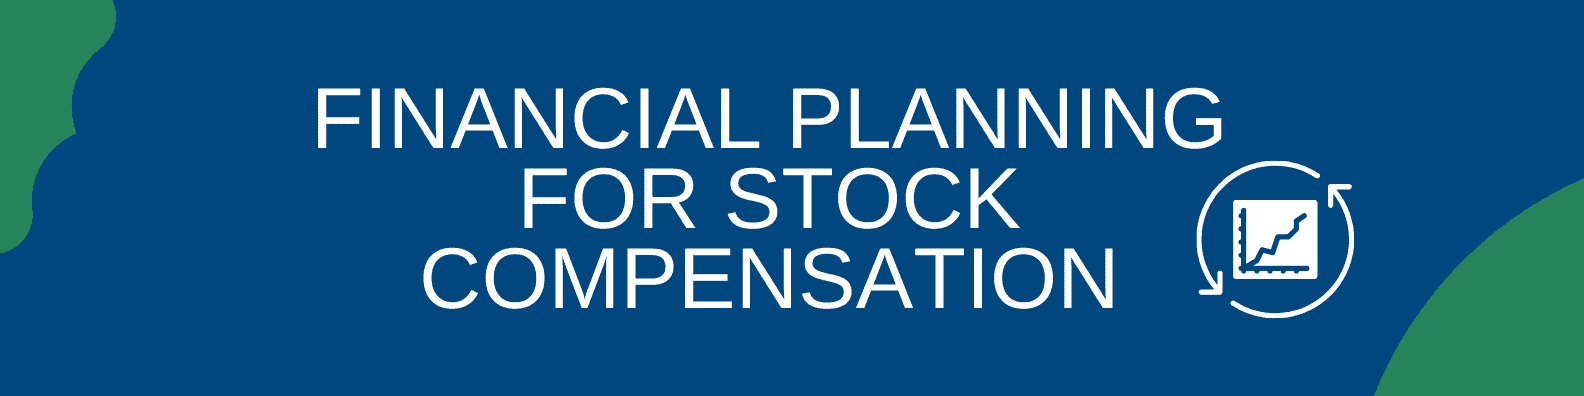 Educational banner for a seminar or resource on how to manage and plan finances that involve stock compensation.